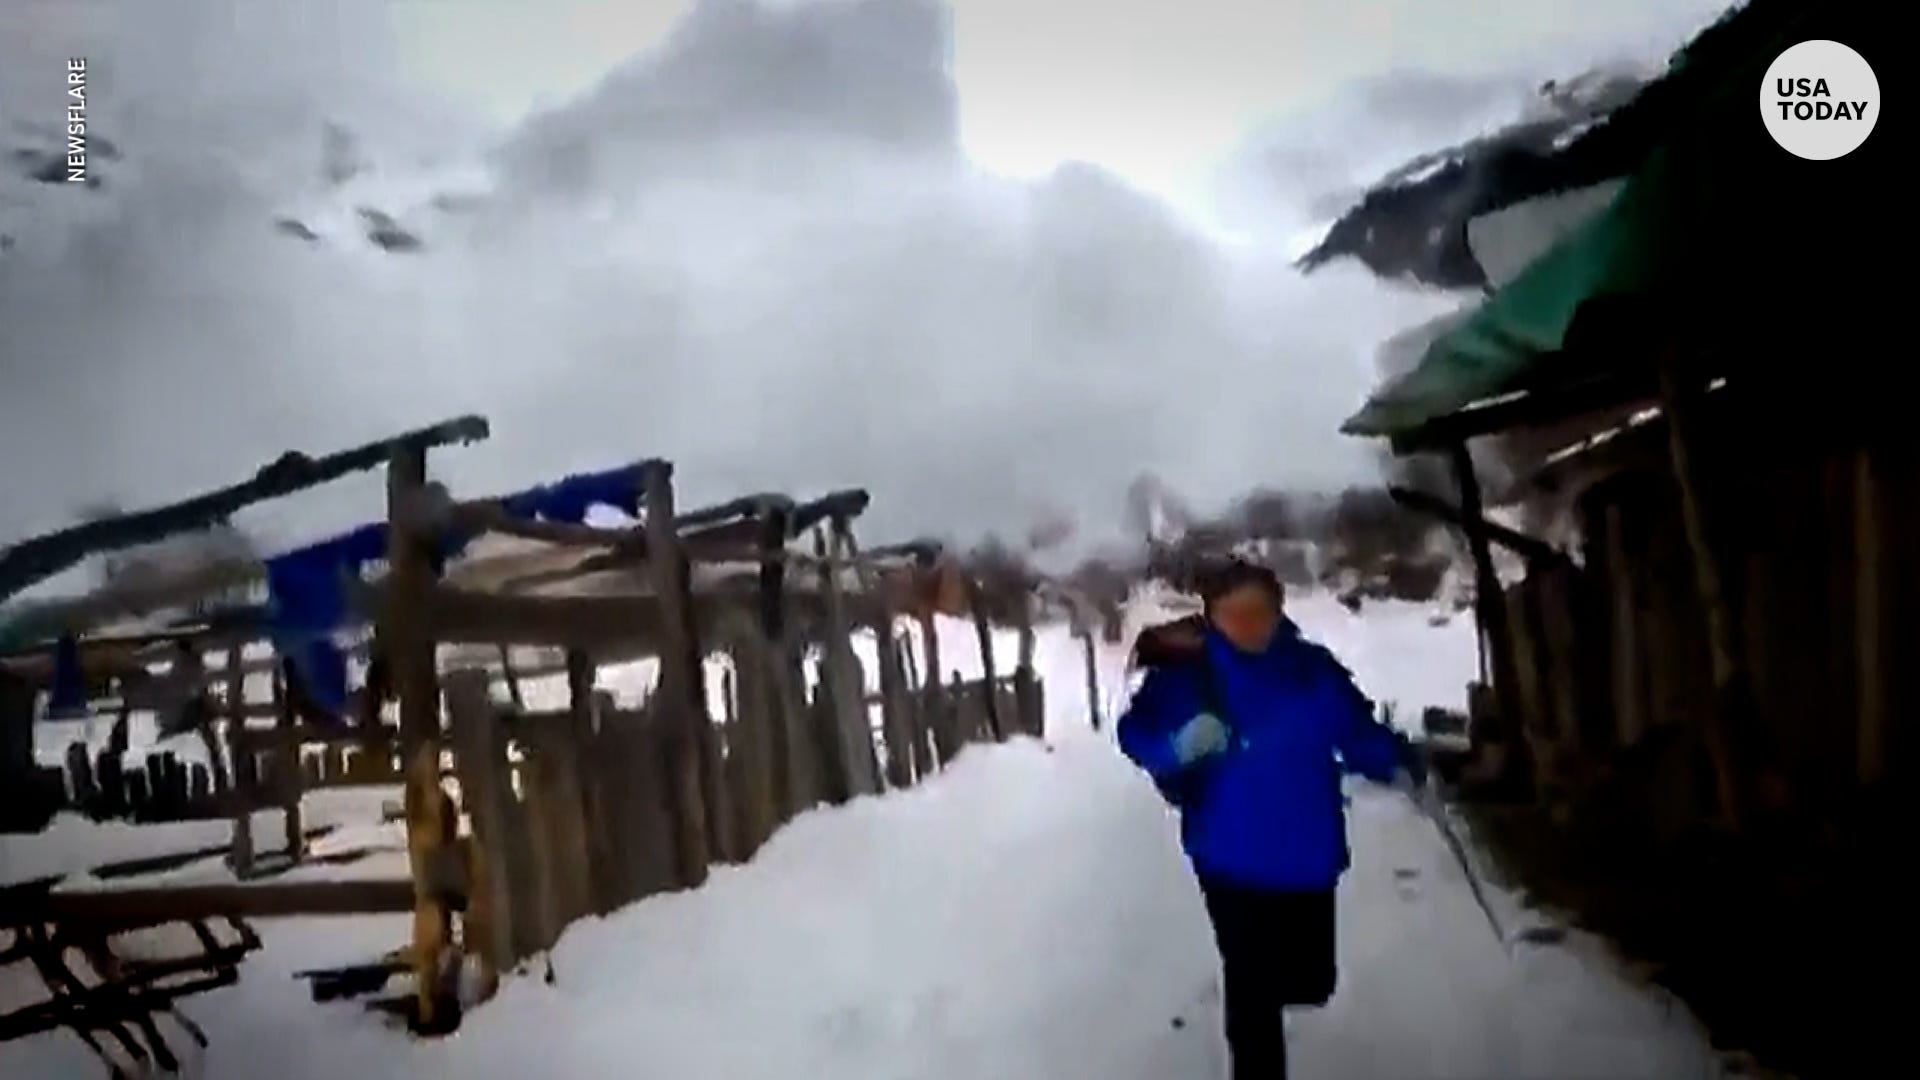 Barrelling avalanche urges tourists to run for cover on mountain slope thumbnail